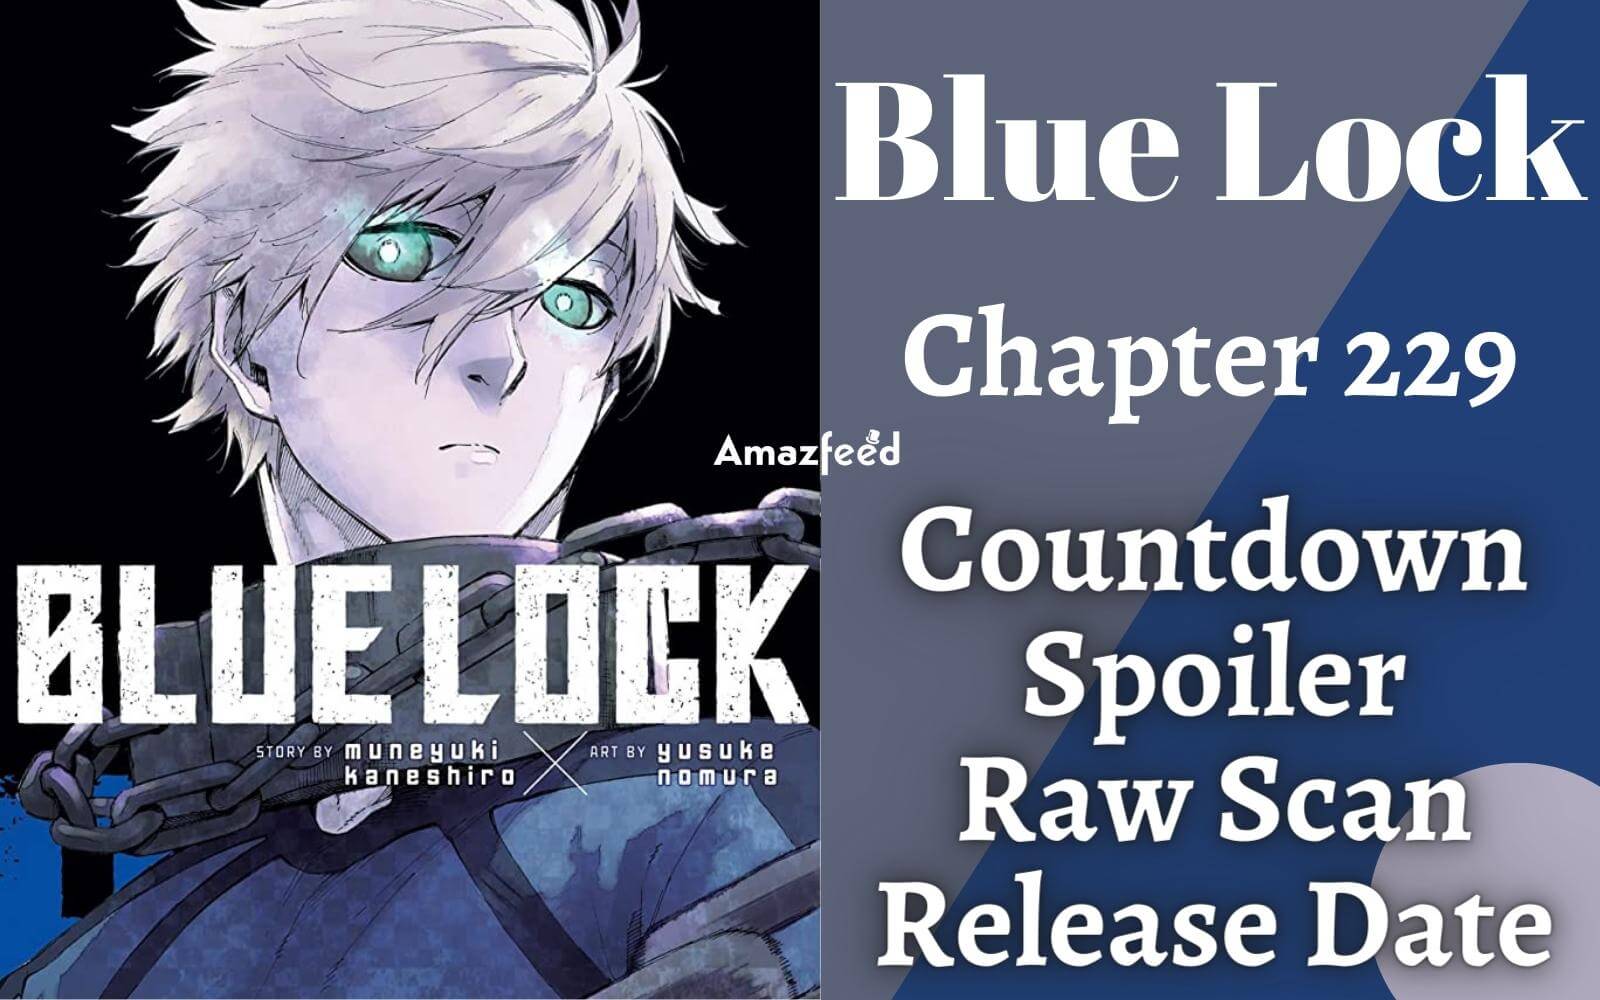 Blue Lock chapter 229: Blue Lock chapter 229: Release date, time